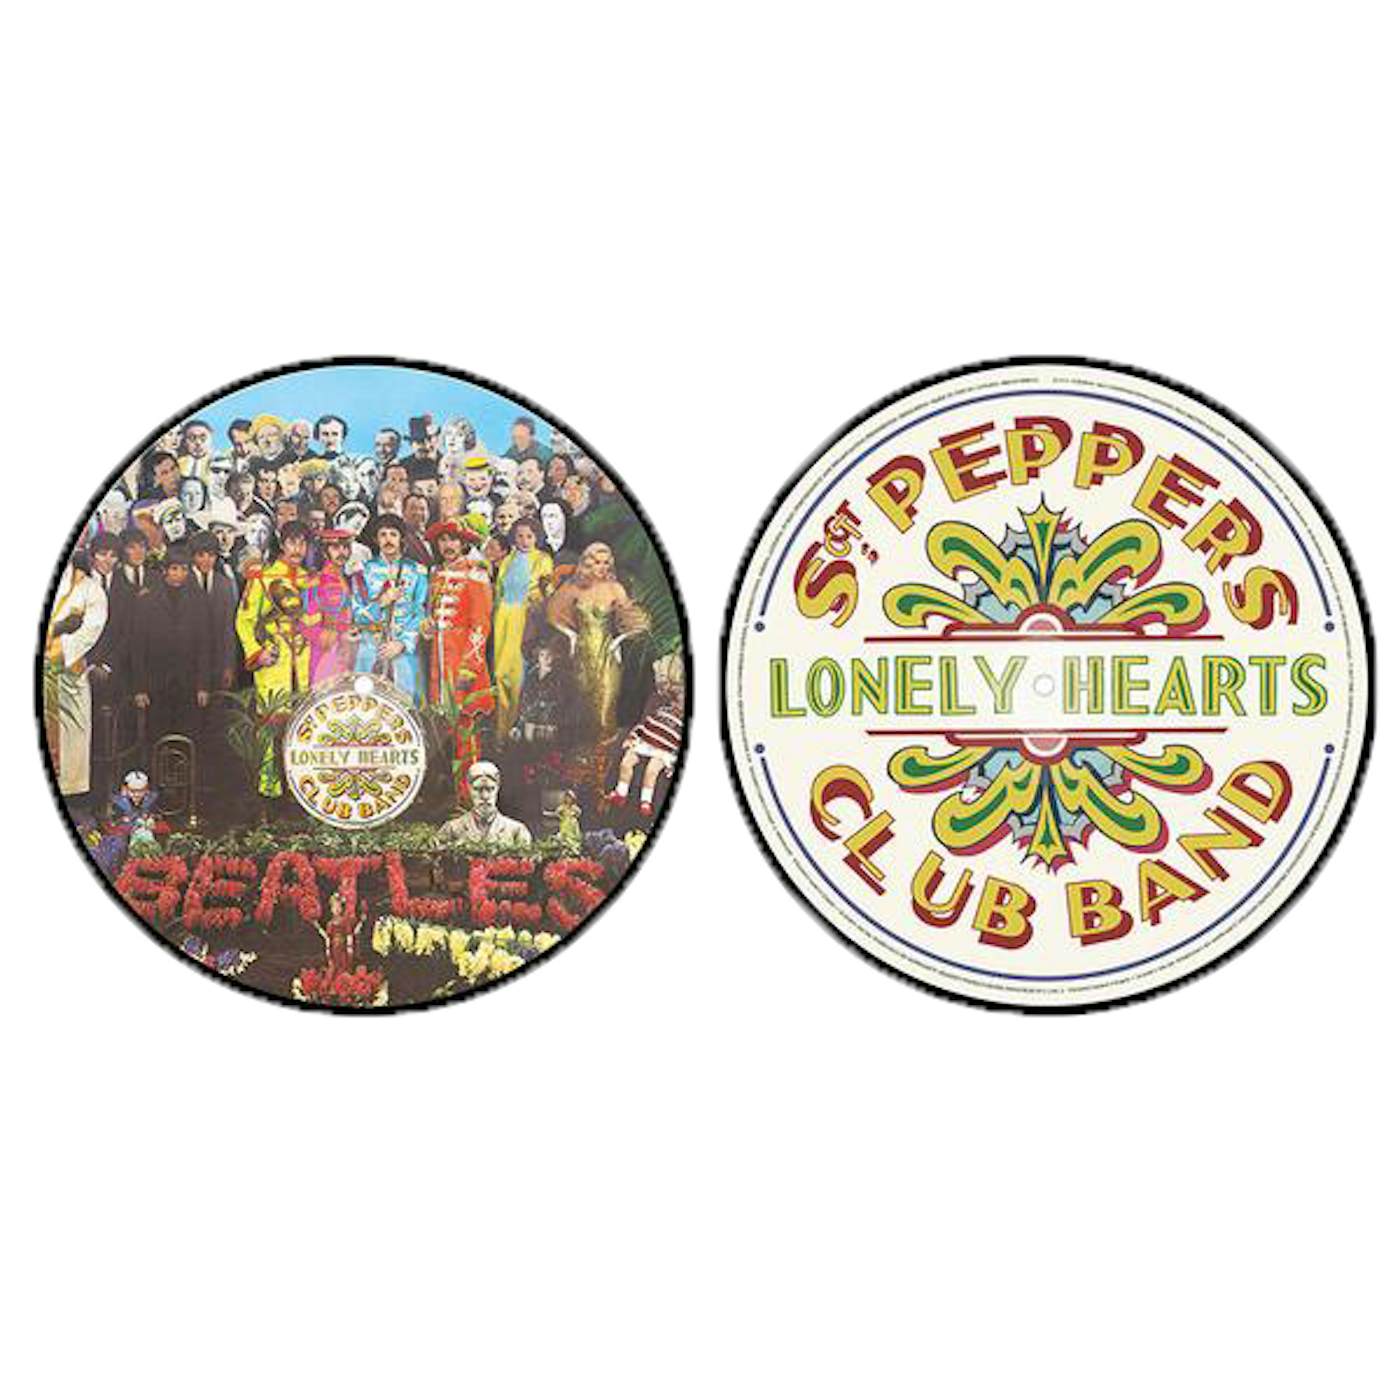 The Beatles Sgt. Pepper's Lonely Hearts Club Band Anniversary